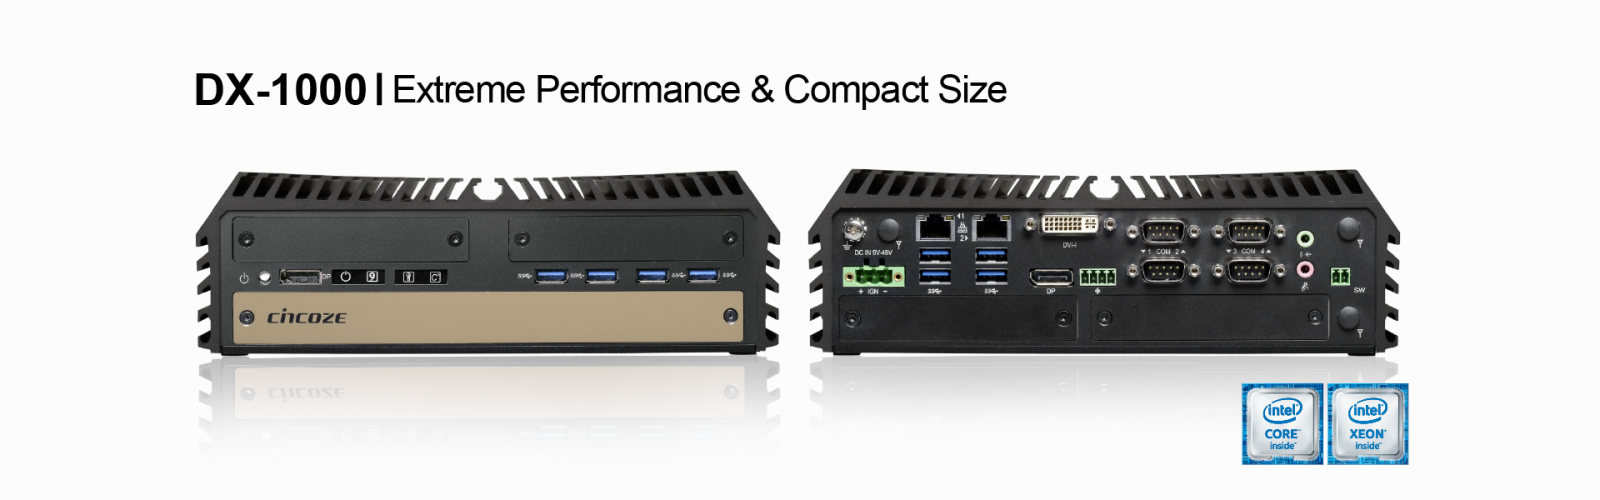 Cincoze Launches Rugged Workstation with 7th/6th Generation Intel® Xeon® E3 and Core™ Processors